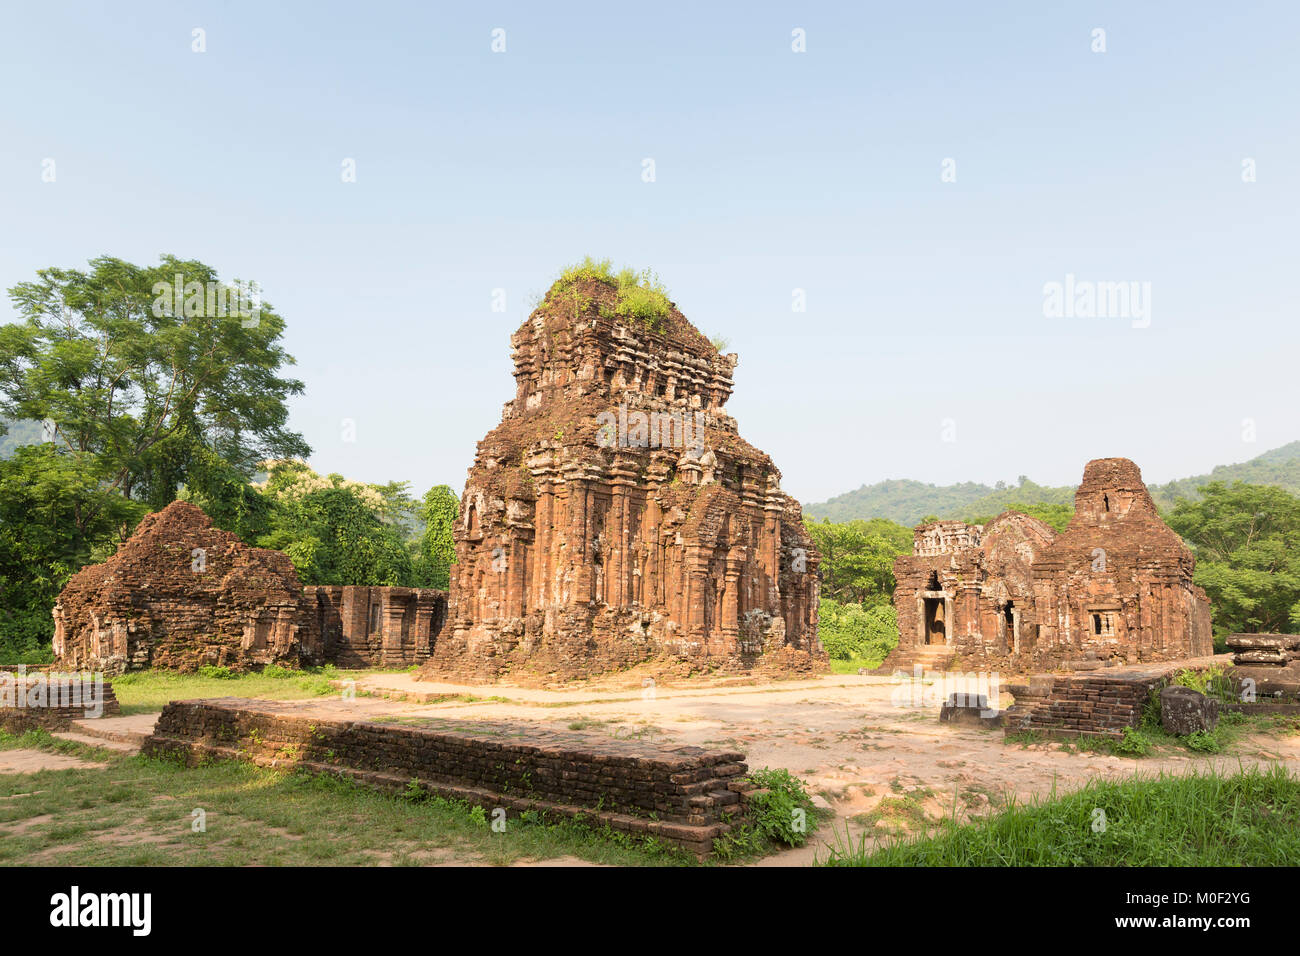 Temple ruins of the My Son complex near Hoi An in Vietnam Stock Photo